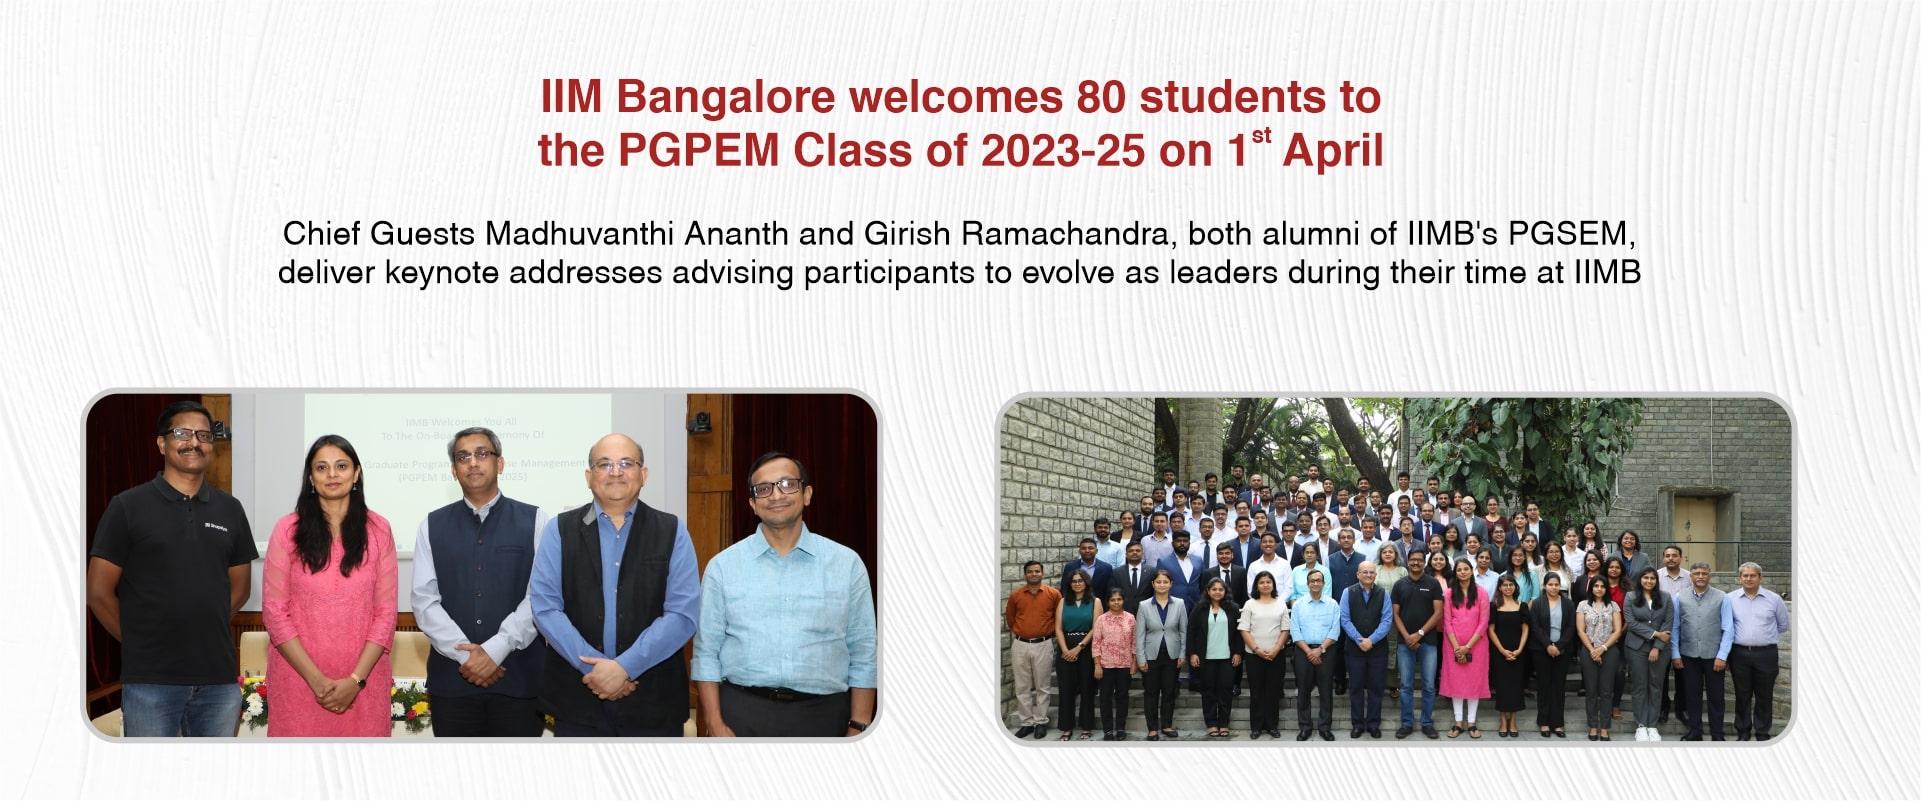 IIM Bangalore welcomes 80 students to the PGPEM Class of 2023-25 on 1st April